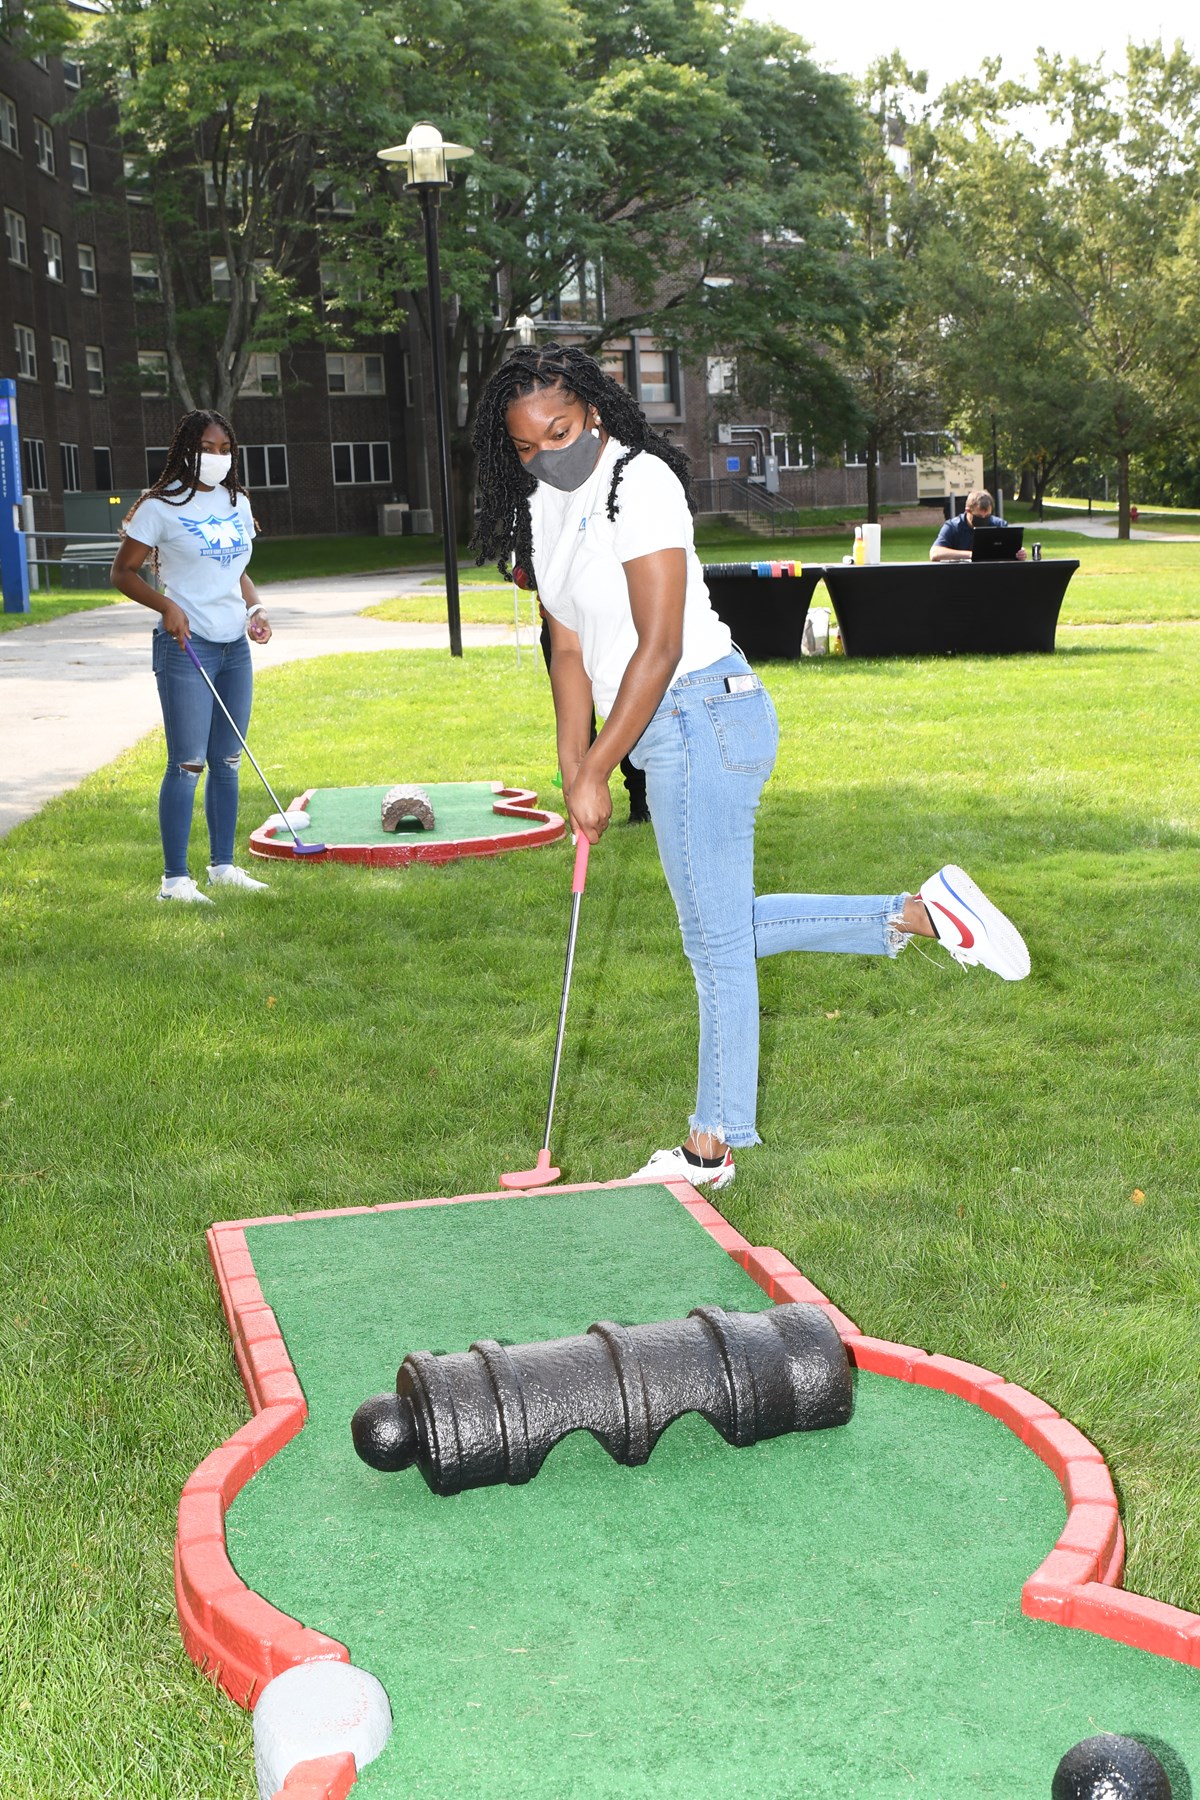 Fall 2020: students in masks playing mini golf outside on East Campus at UMass Lowell.